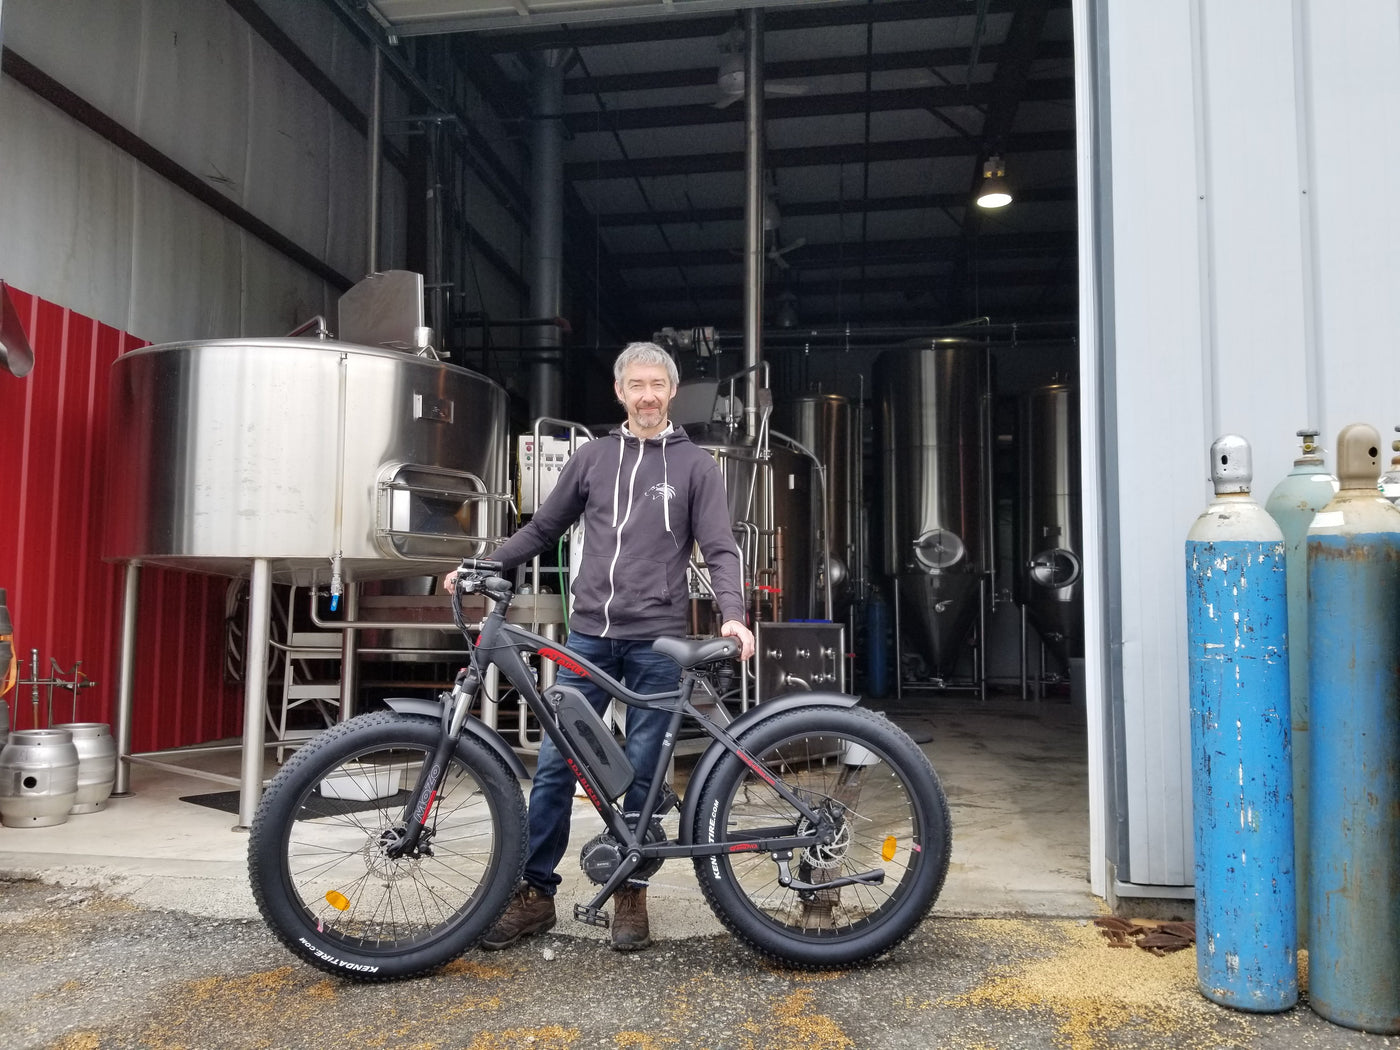 A smiling man poses with a DJ Fat Bike Mid-Drive fat tire e-bike in front of brewing equipment